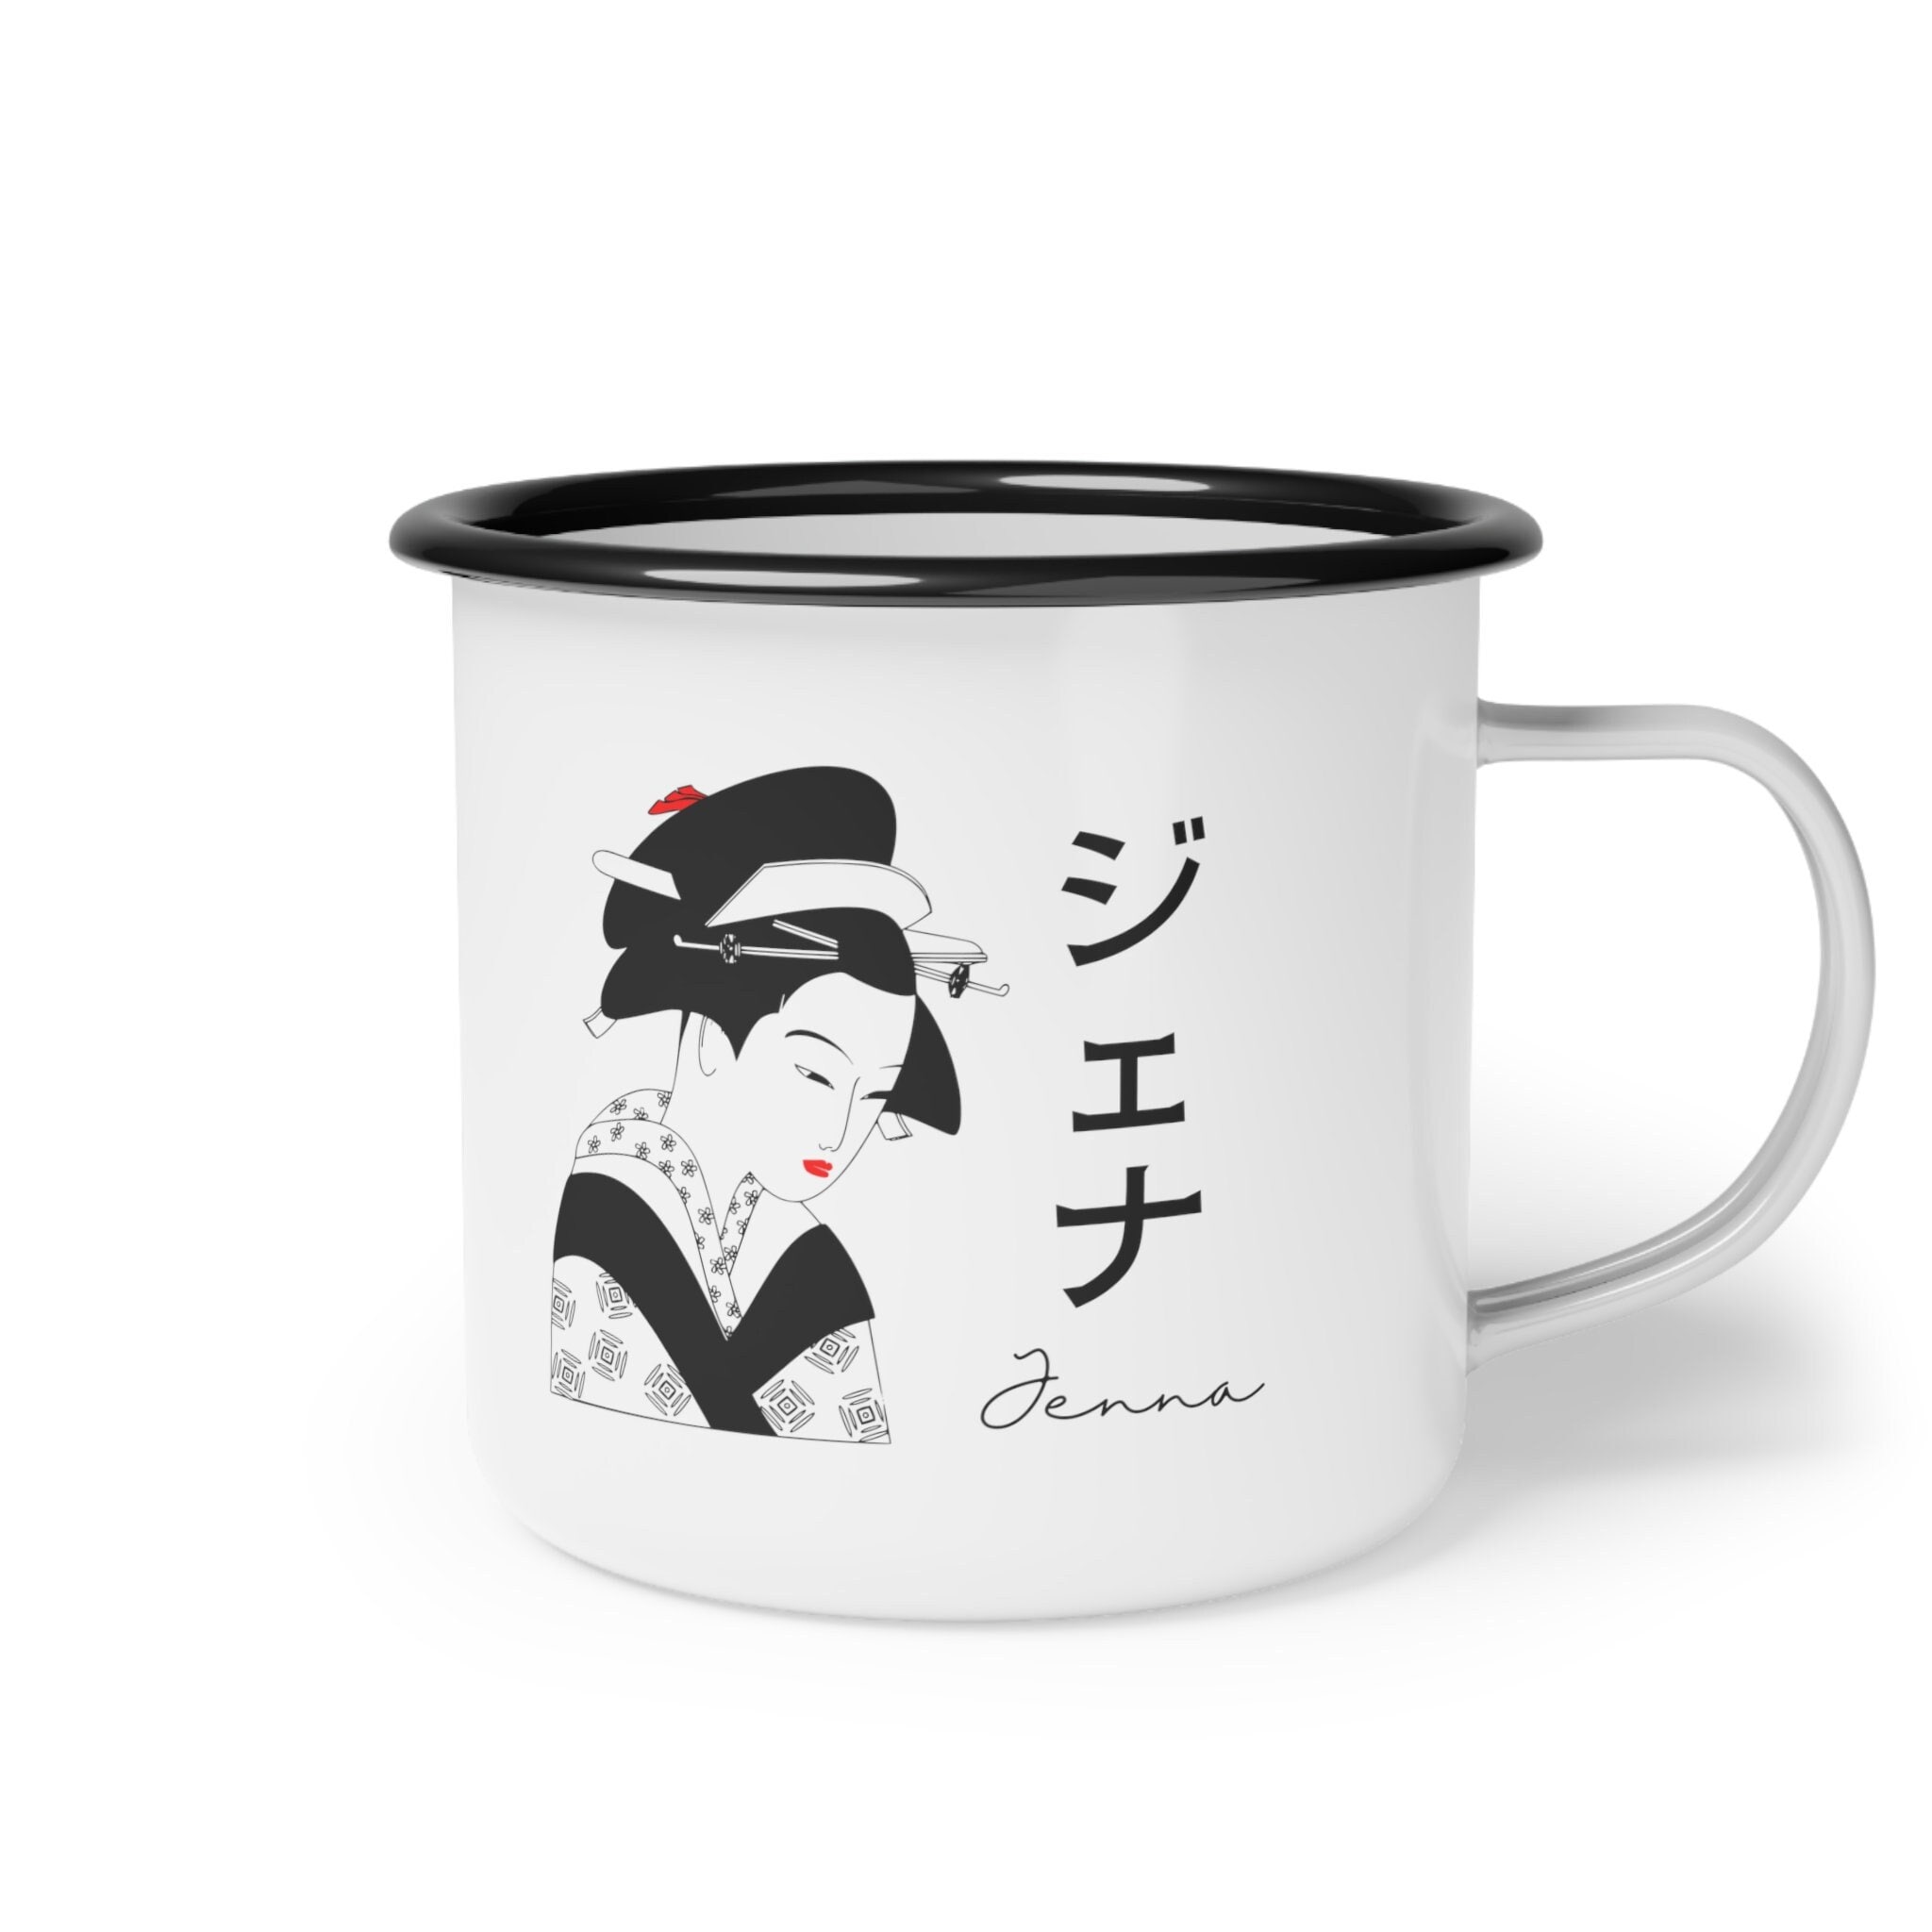 Daily Thermos Coffee Mug in 350ml With Minimalist Japanese Artist Design 